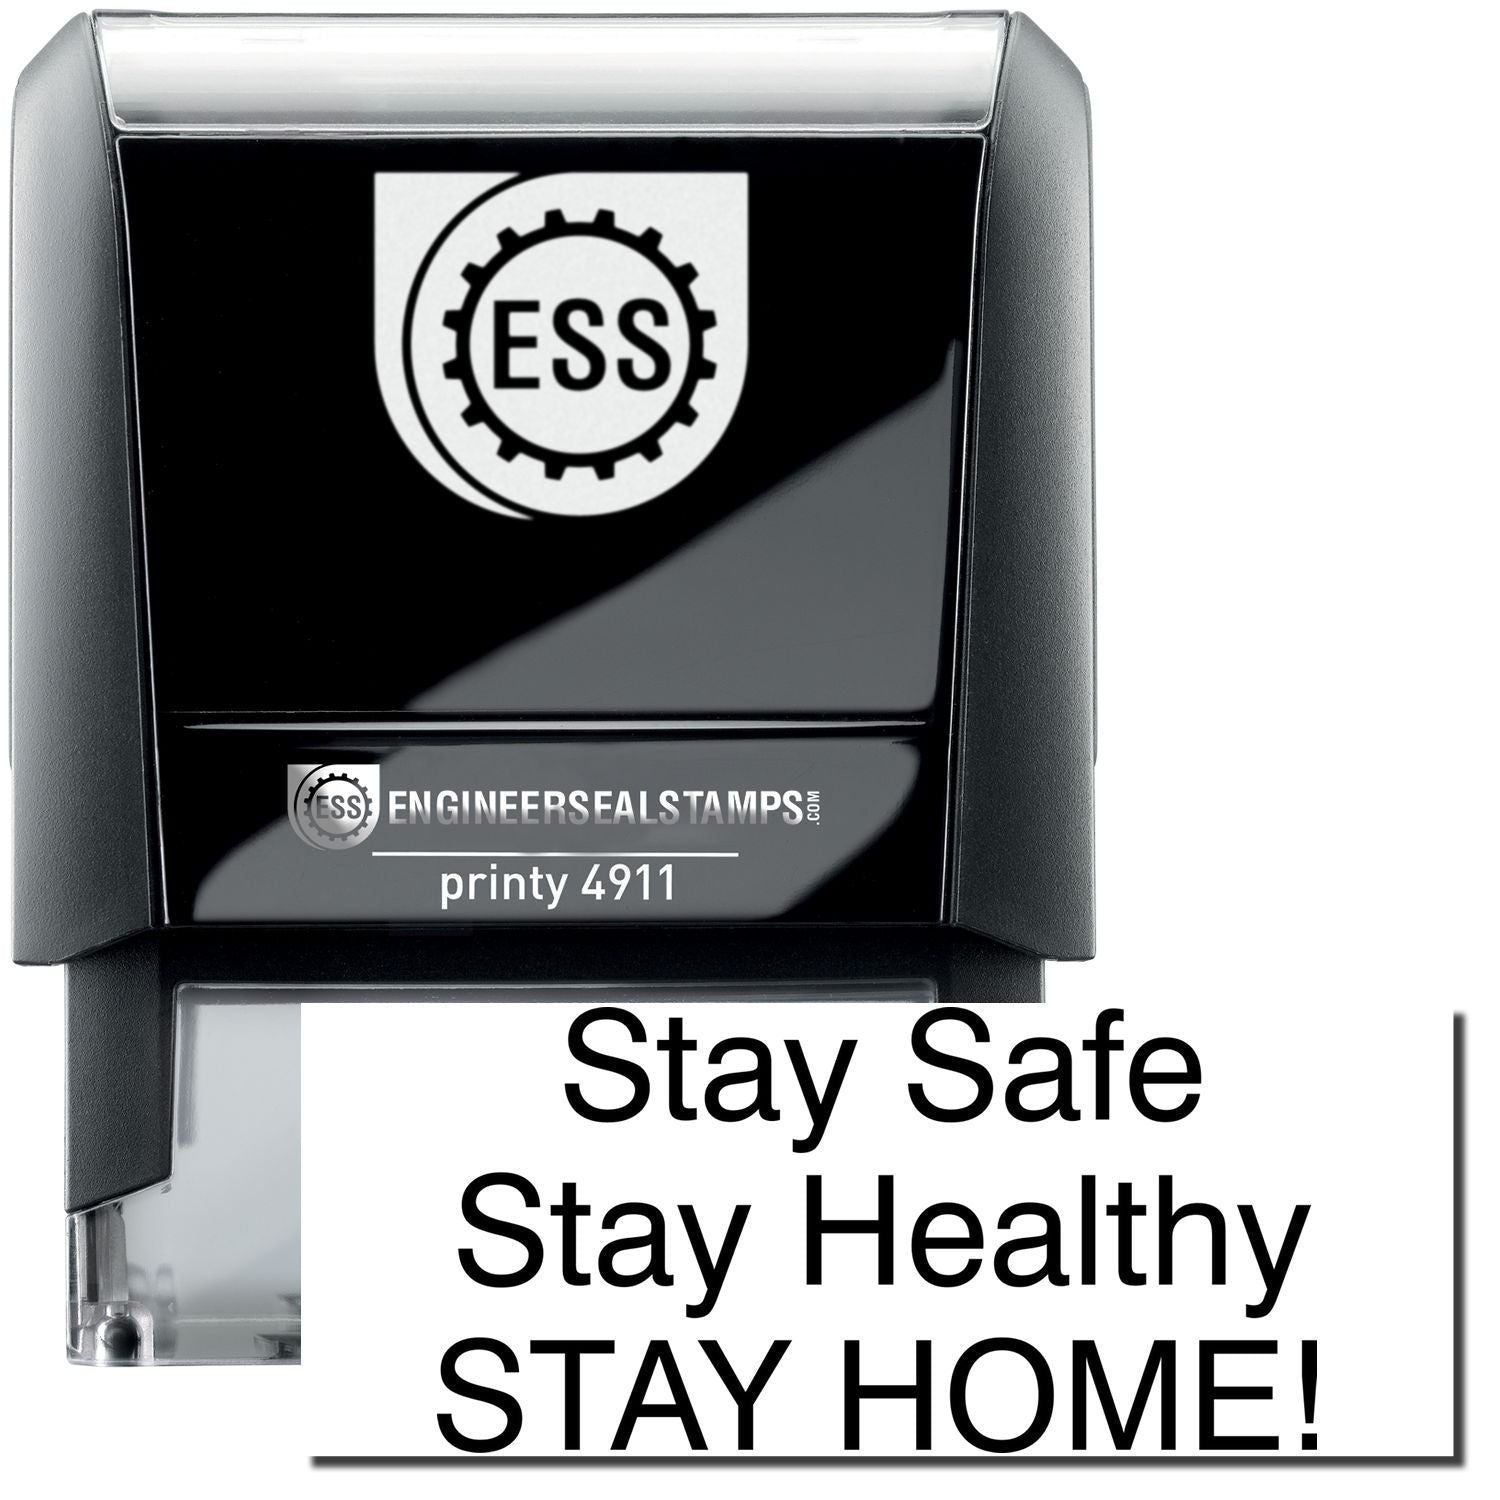 A self-inking stamp with a stamped image showing how the text "Stay Safe Stay Healthy STAY HOME!" is displayed after stamping.